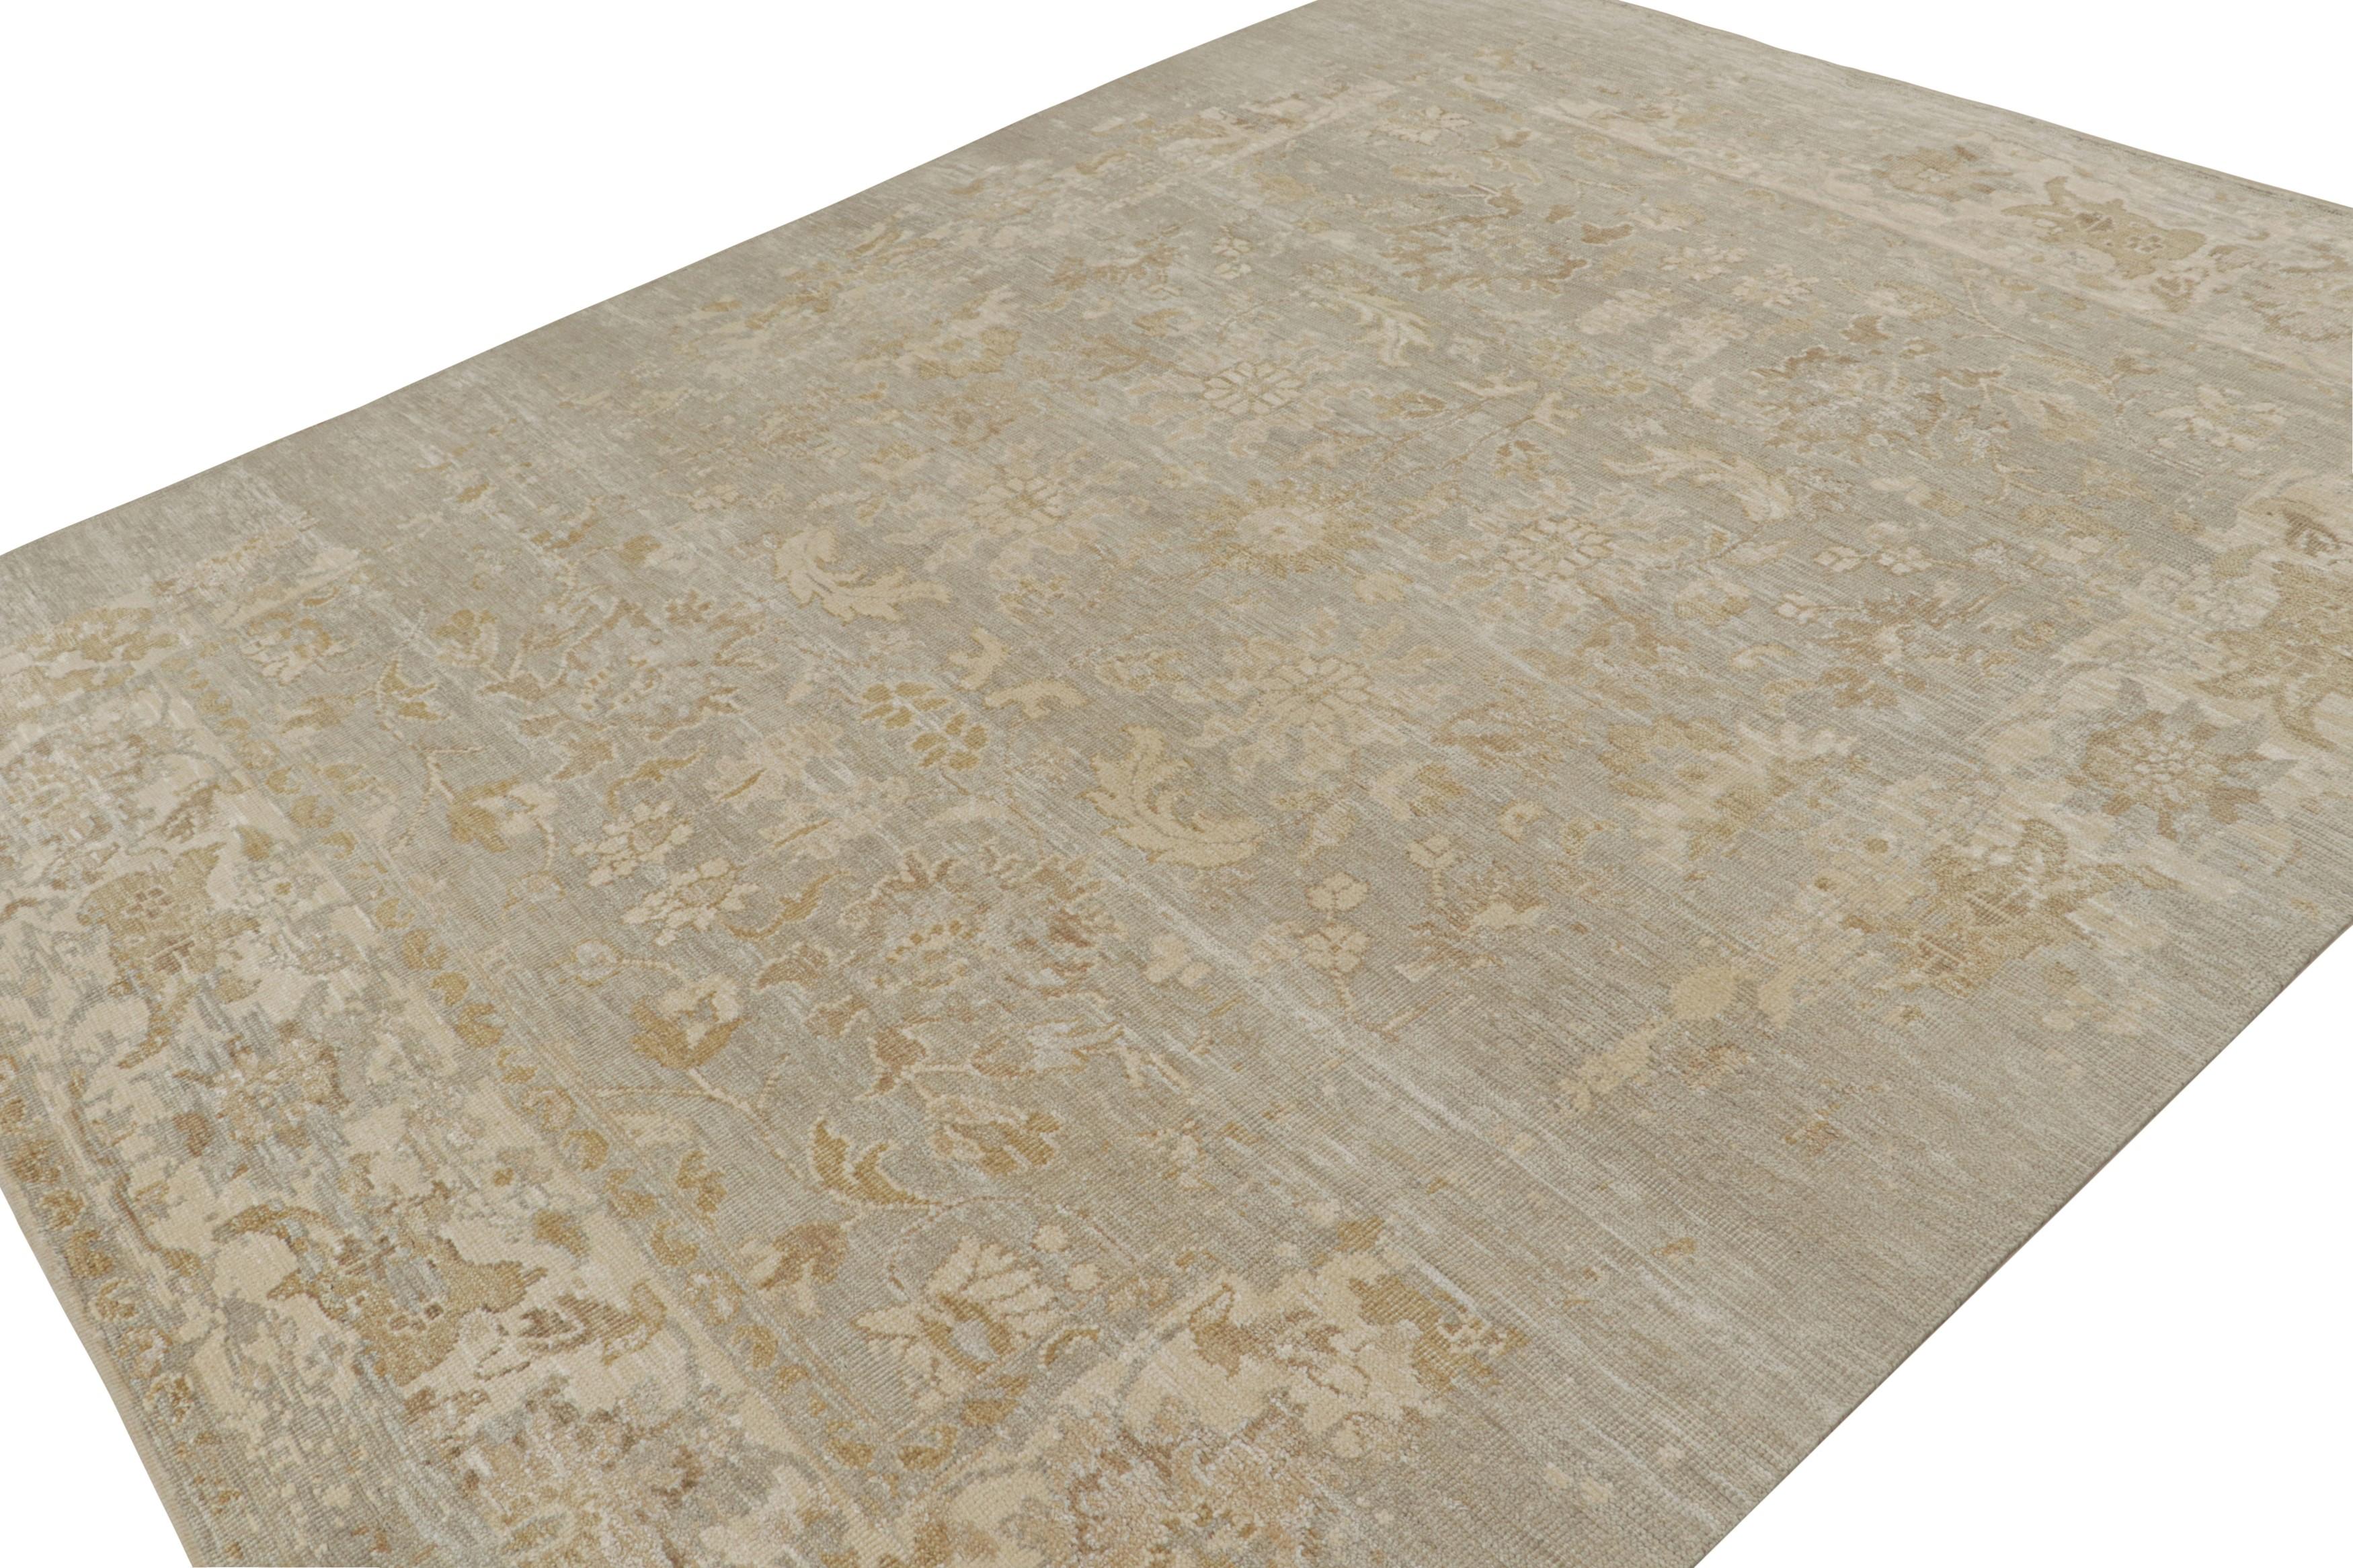 This 7x10 rug from the Modern Classics Collection by Rug & Kilim is from a new line inspired by antique Oushak rugs. Hand-knotted in wool & sari silk, its design enjoys beige, gold & gray floral patterns.  

On the Design: 

The rug is made with a